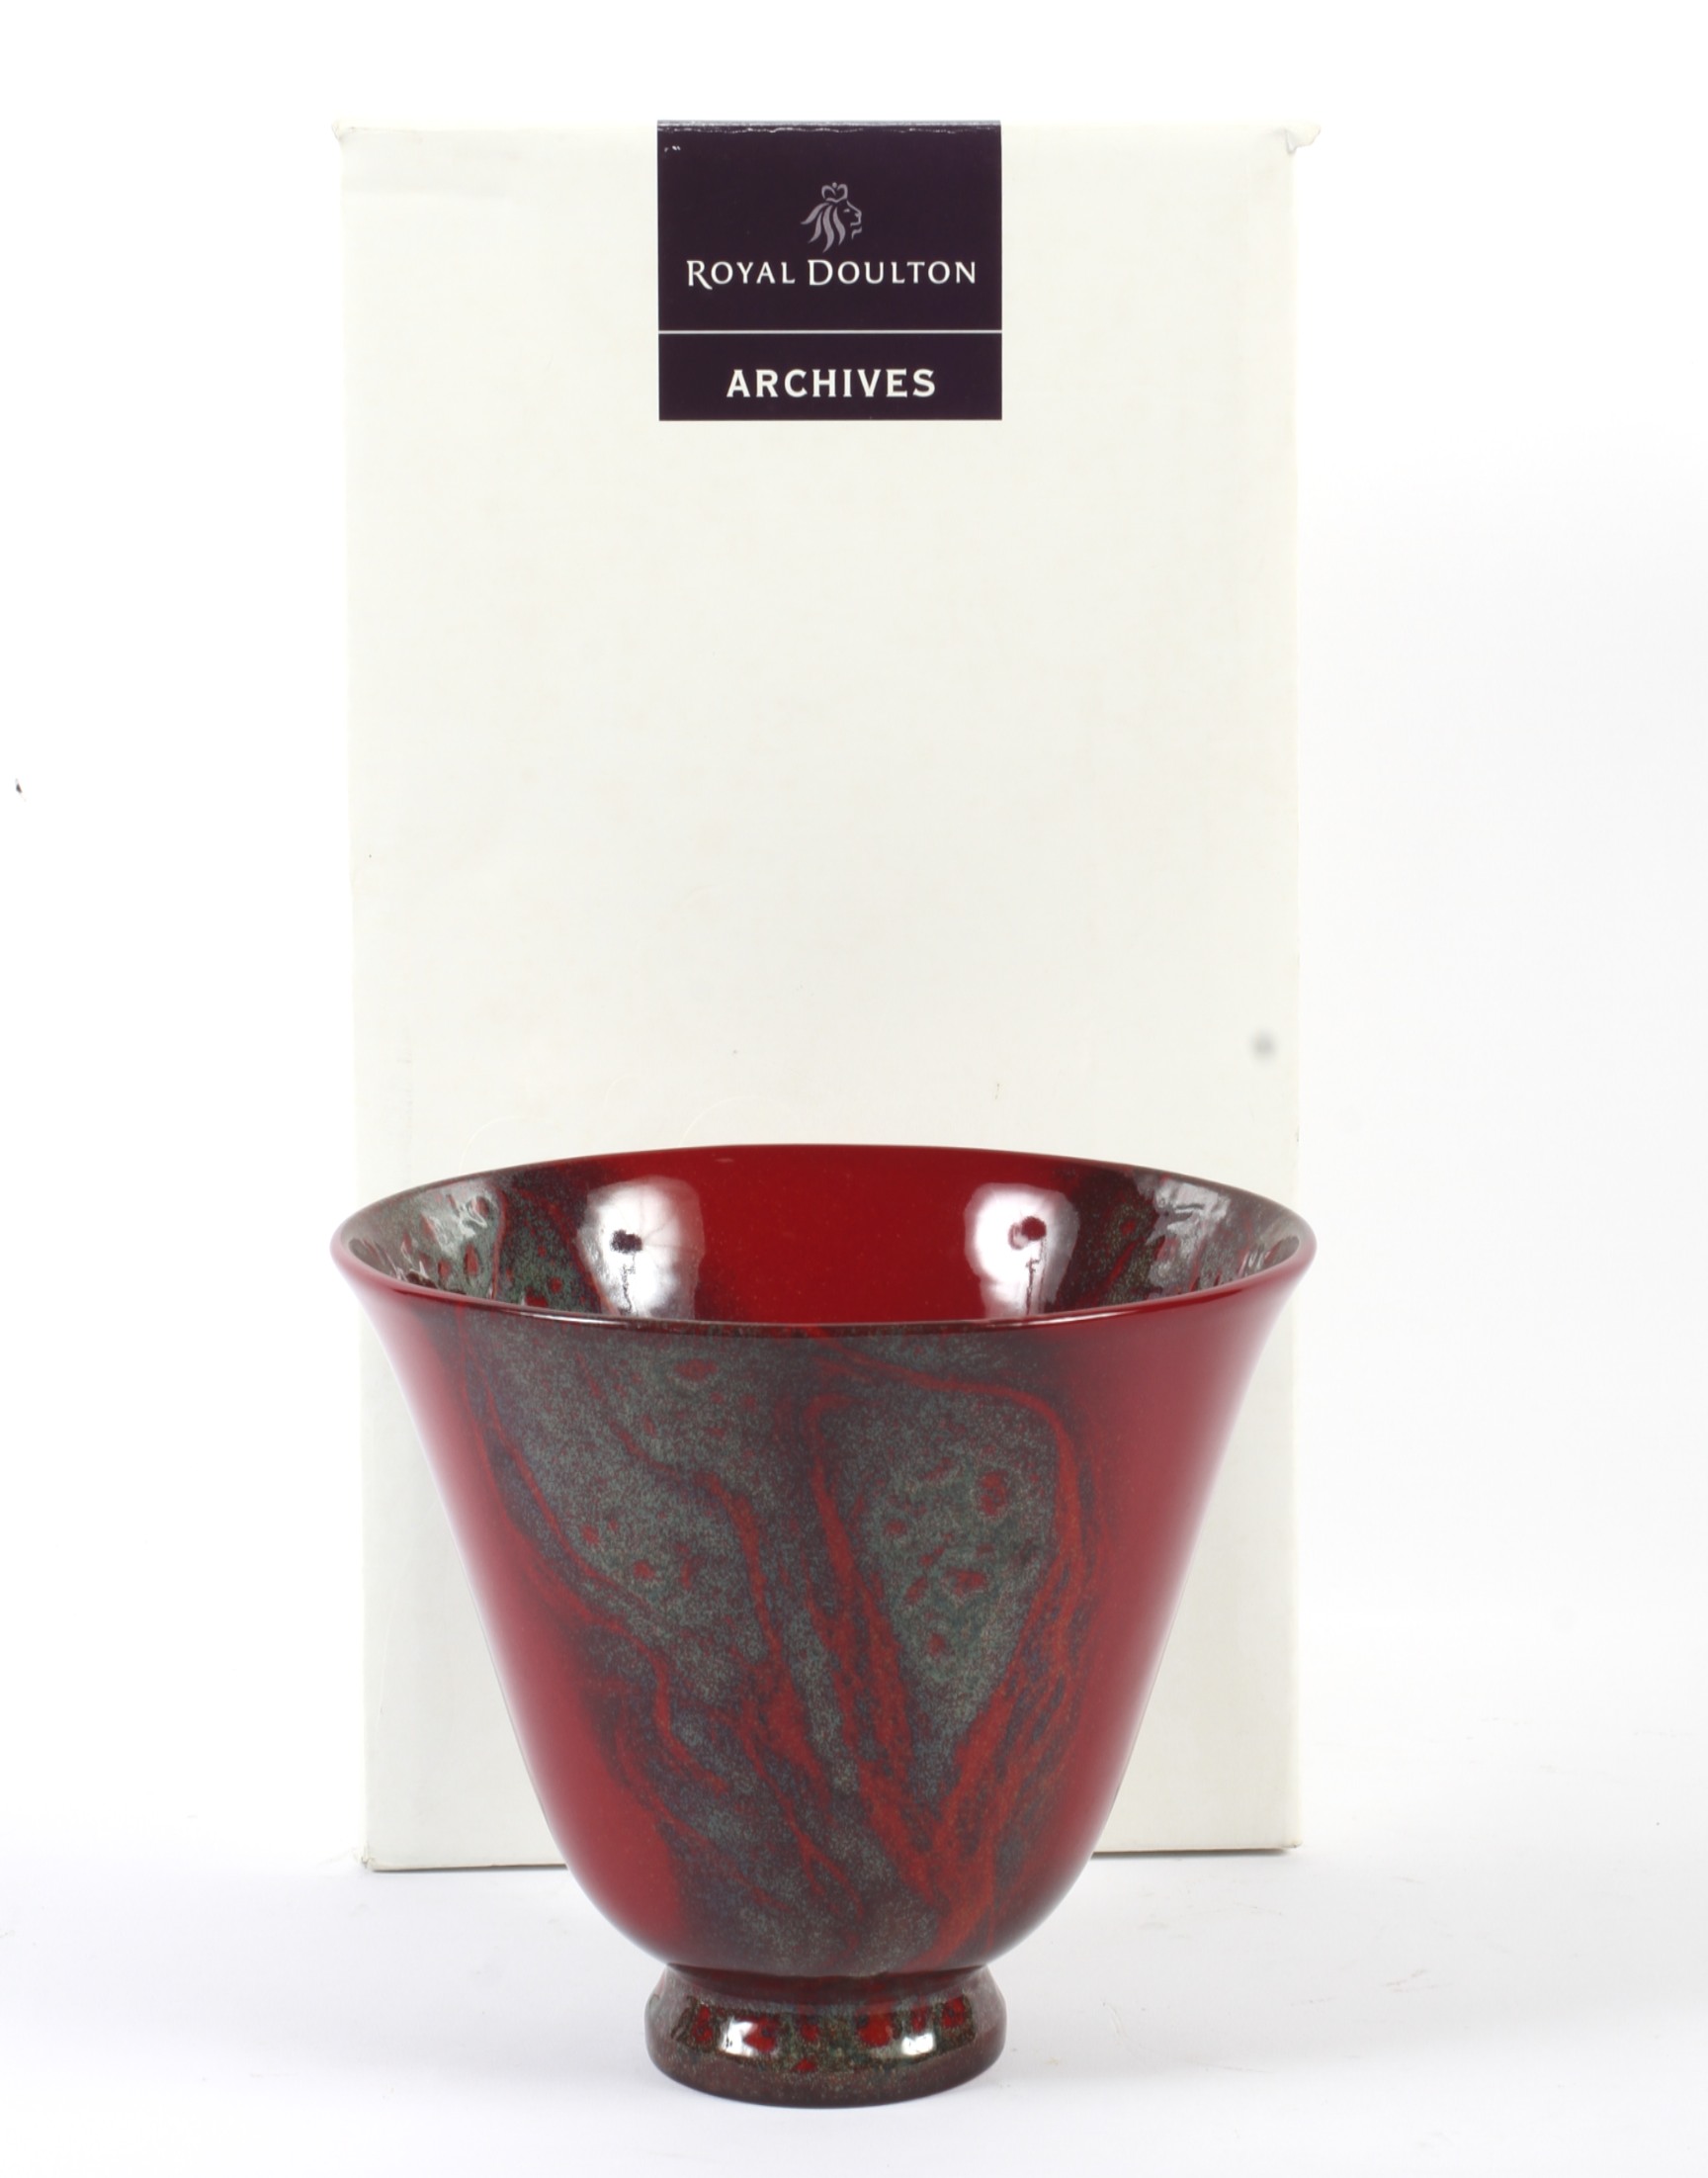 A boxed limited edition Royal Doulton Chaozhou flambe glazed bowl.